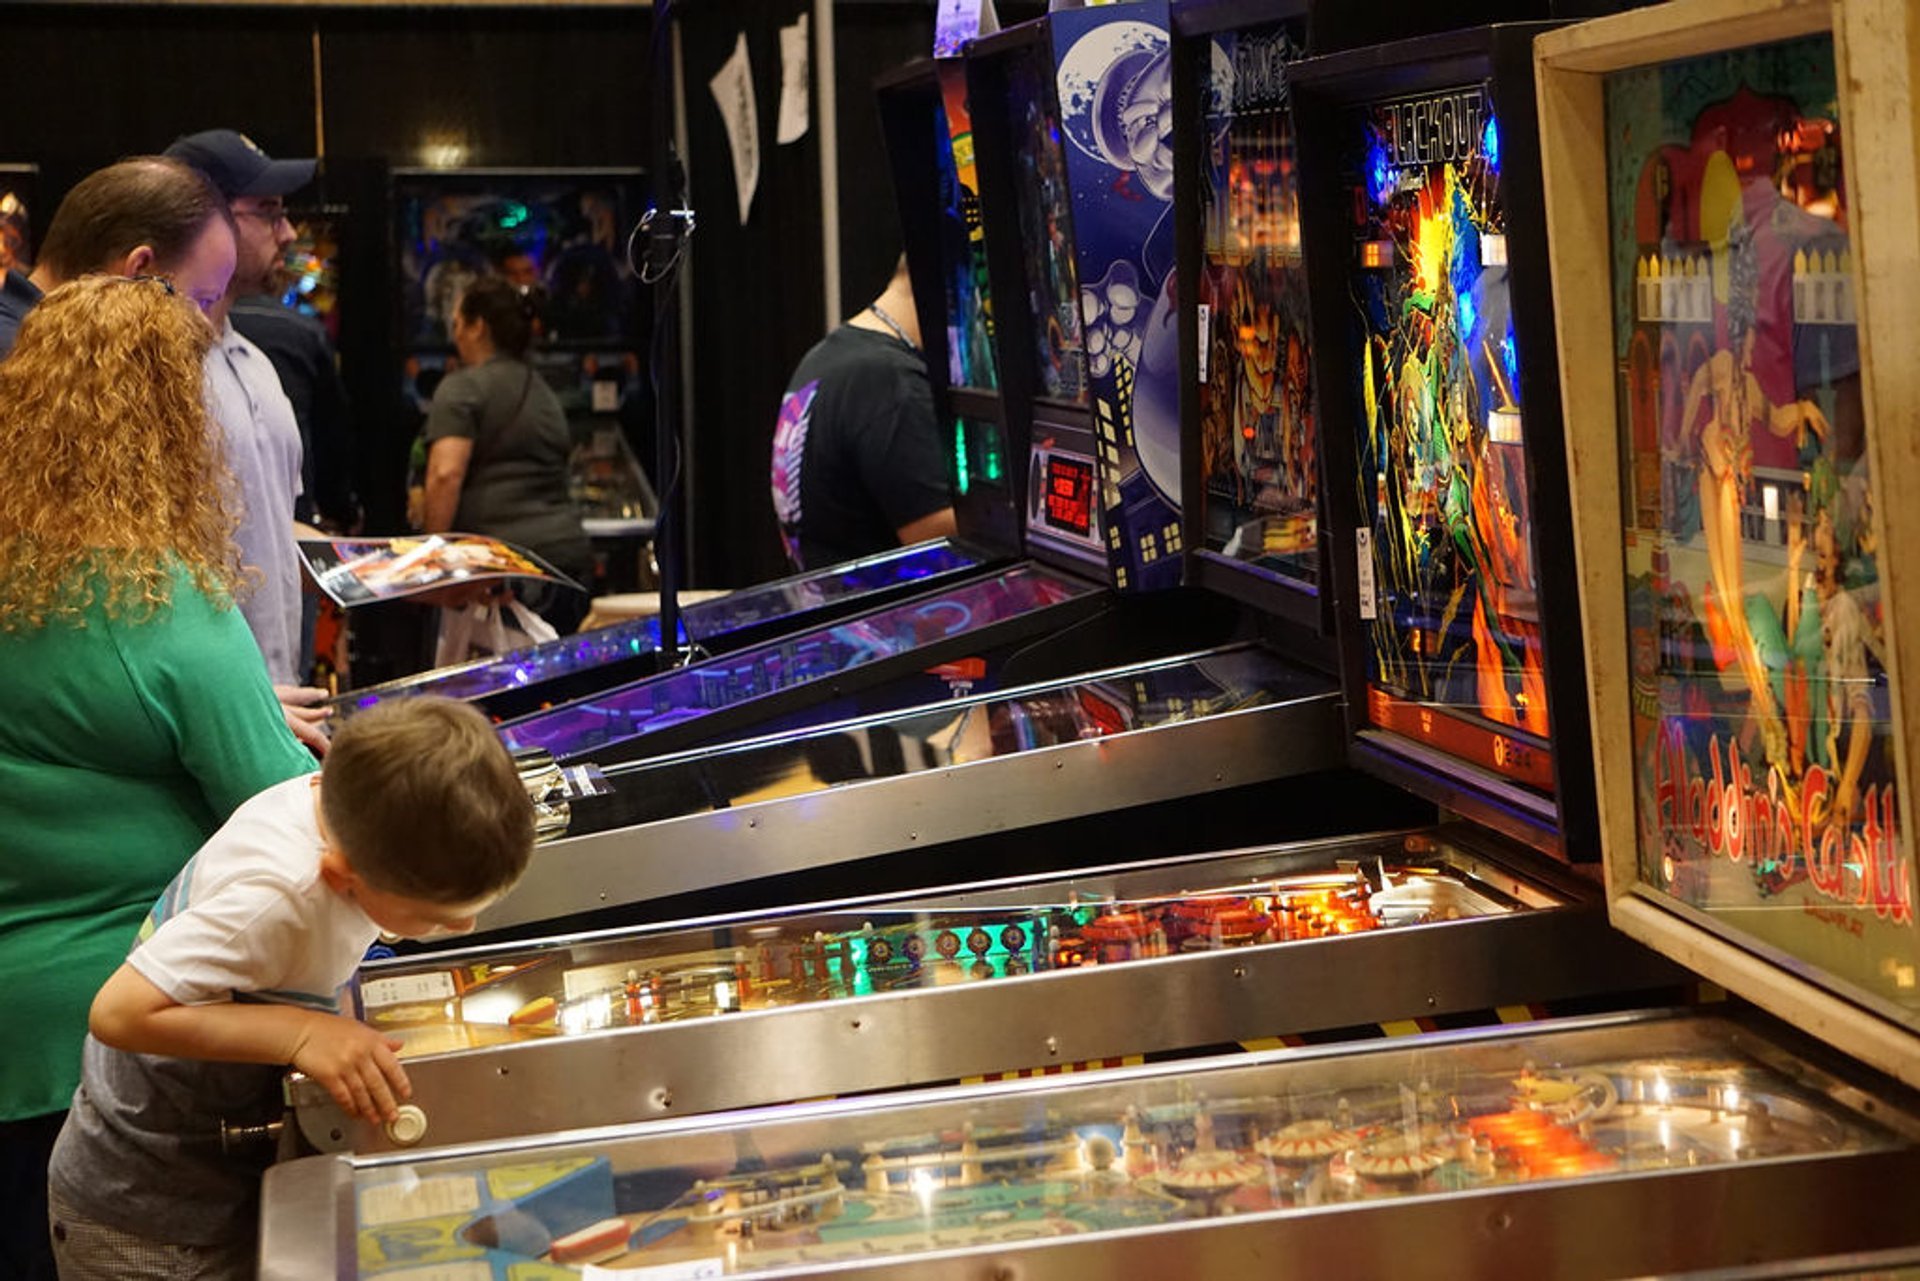 Color run and Texas Pinball Festival mean fun for kids (and kids at heart)  this weekend in D-FW